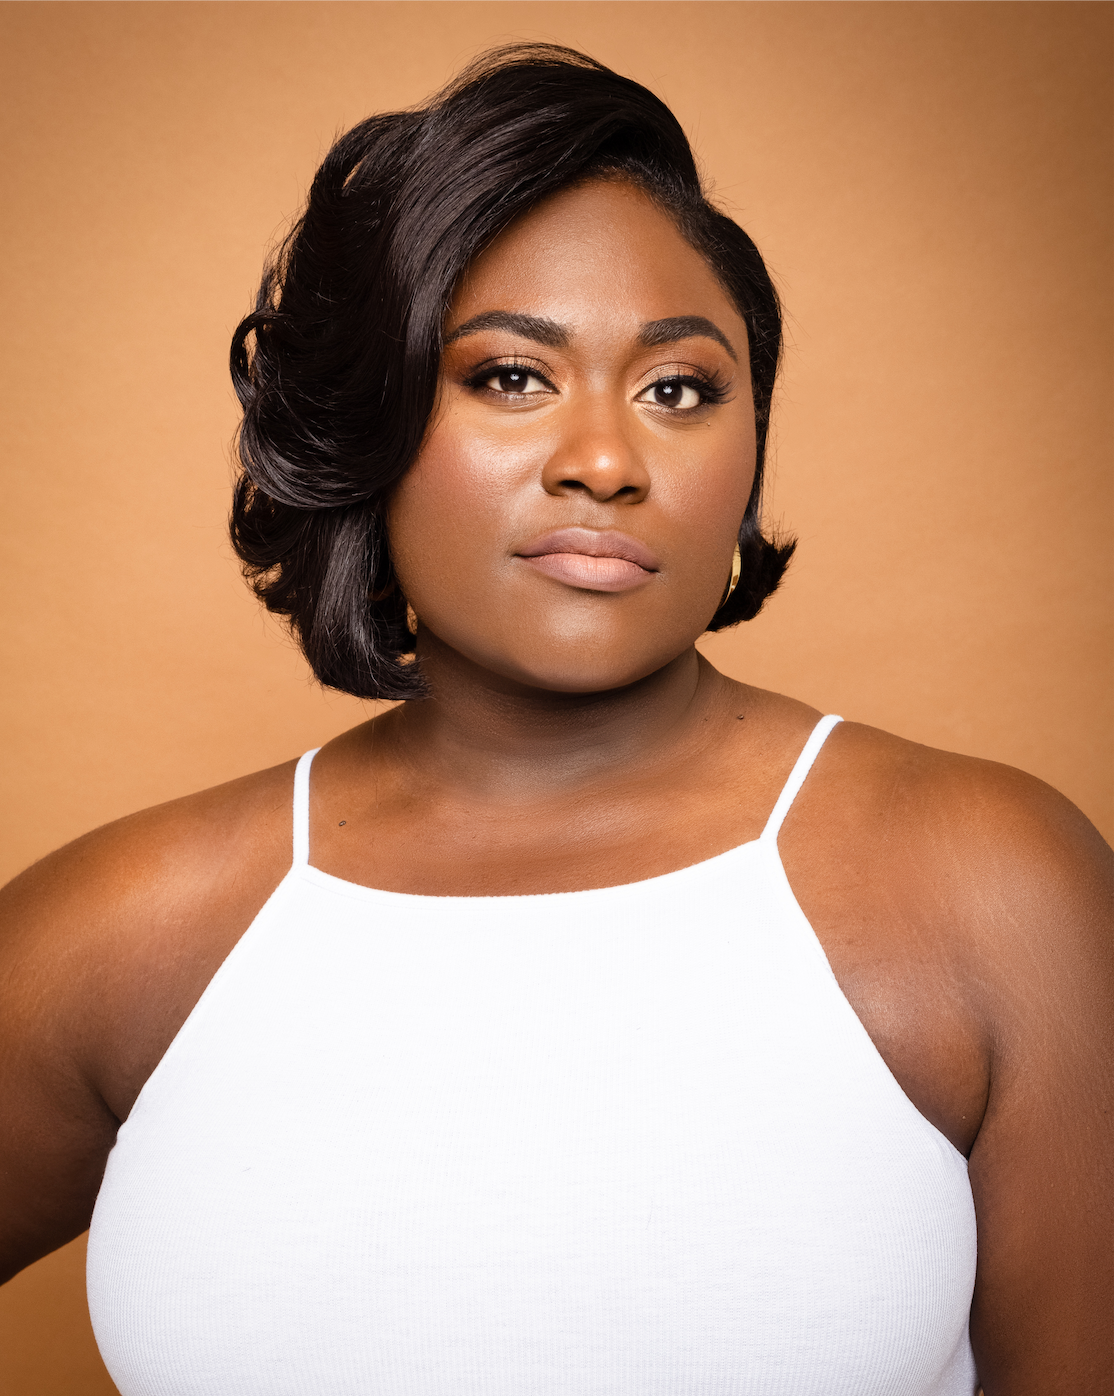 Essence Black Women in Hollywood to Honor Danielle Brooks, Halle Bailey & More